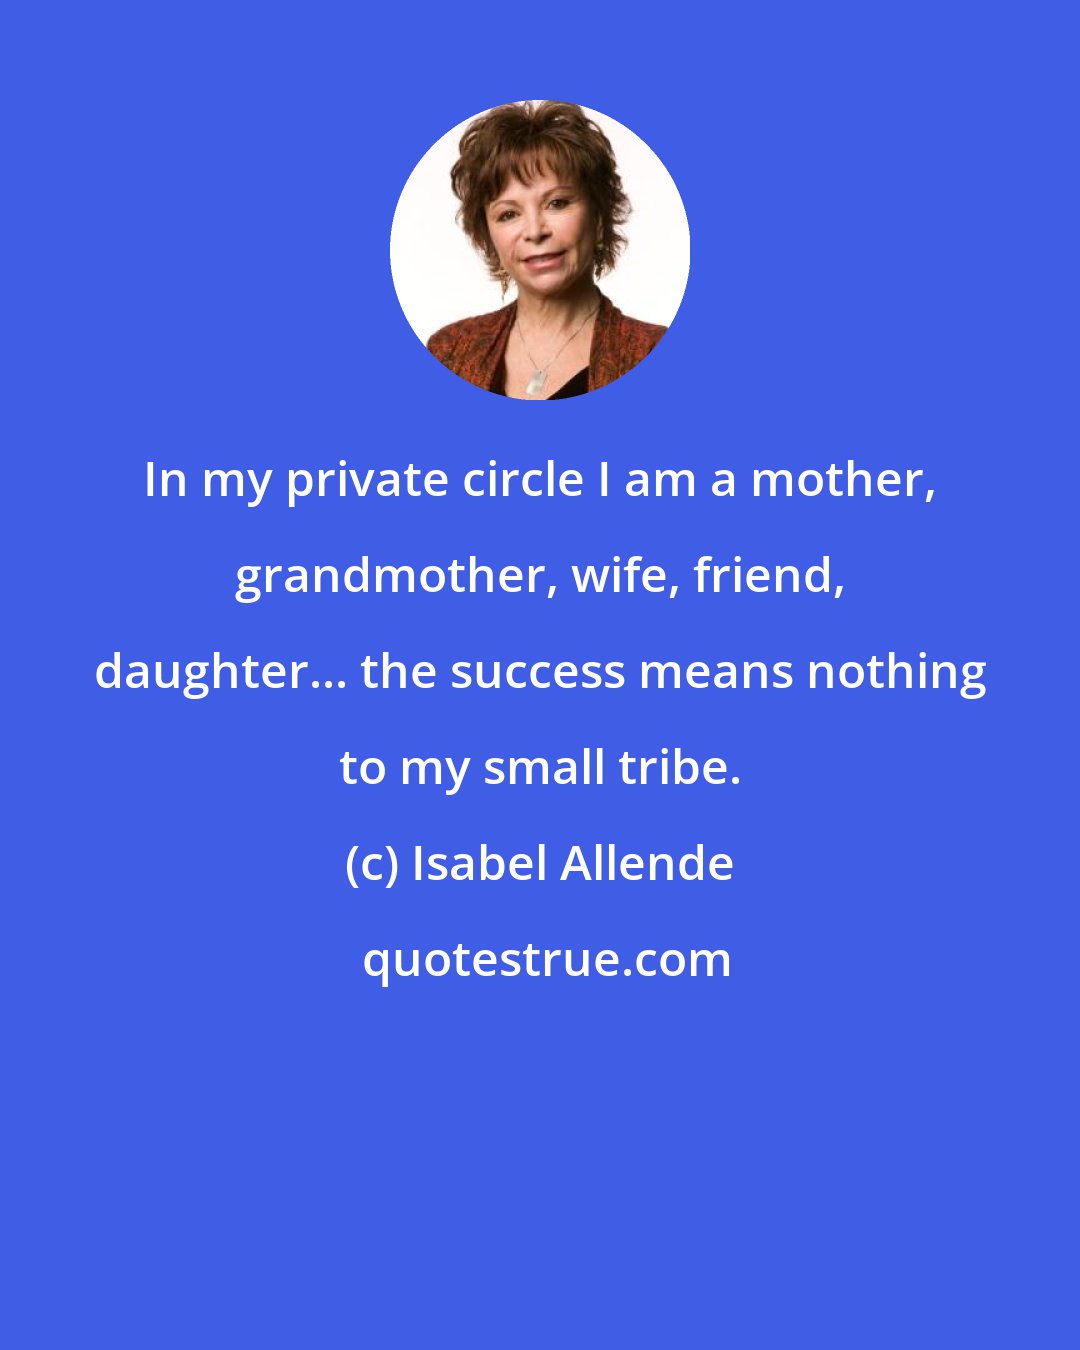 Isabel Allende: In my private circle I am a mother, grandmother, wife, friend, daughter... the success means nothing to my small tribe.